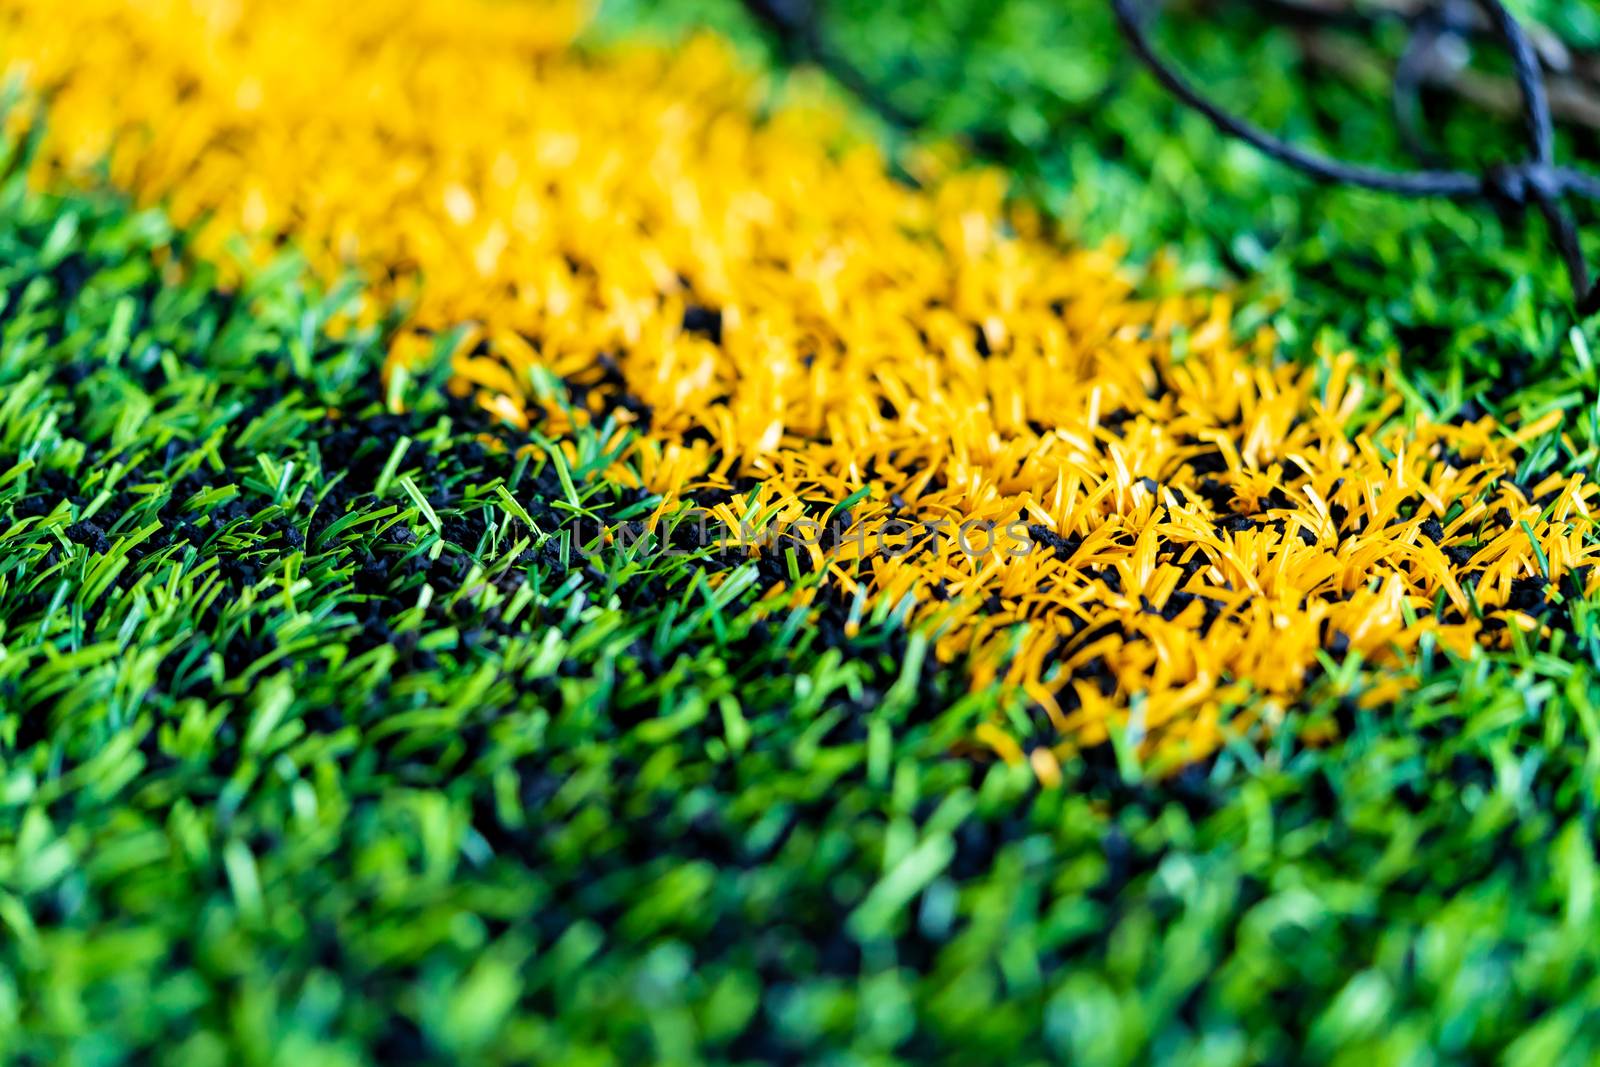 Yellow Boundary Line of an indoor football soccer training field by junce